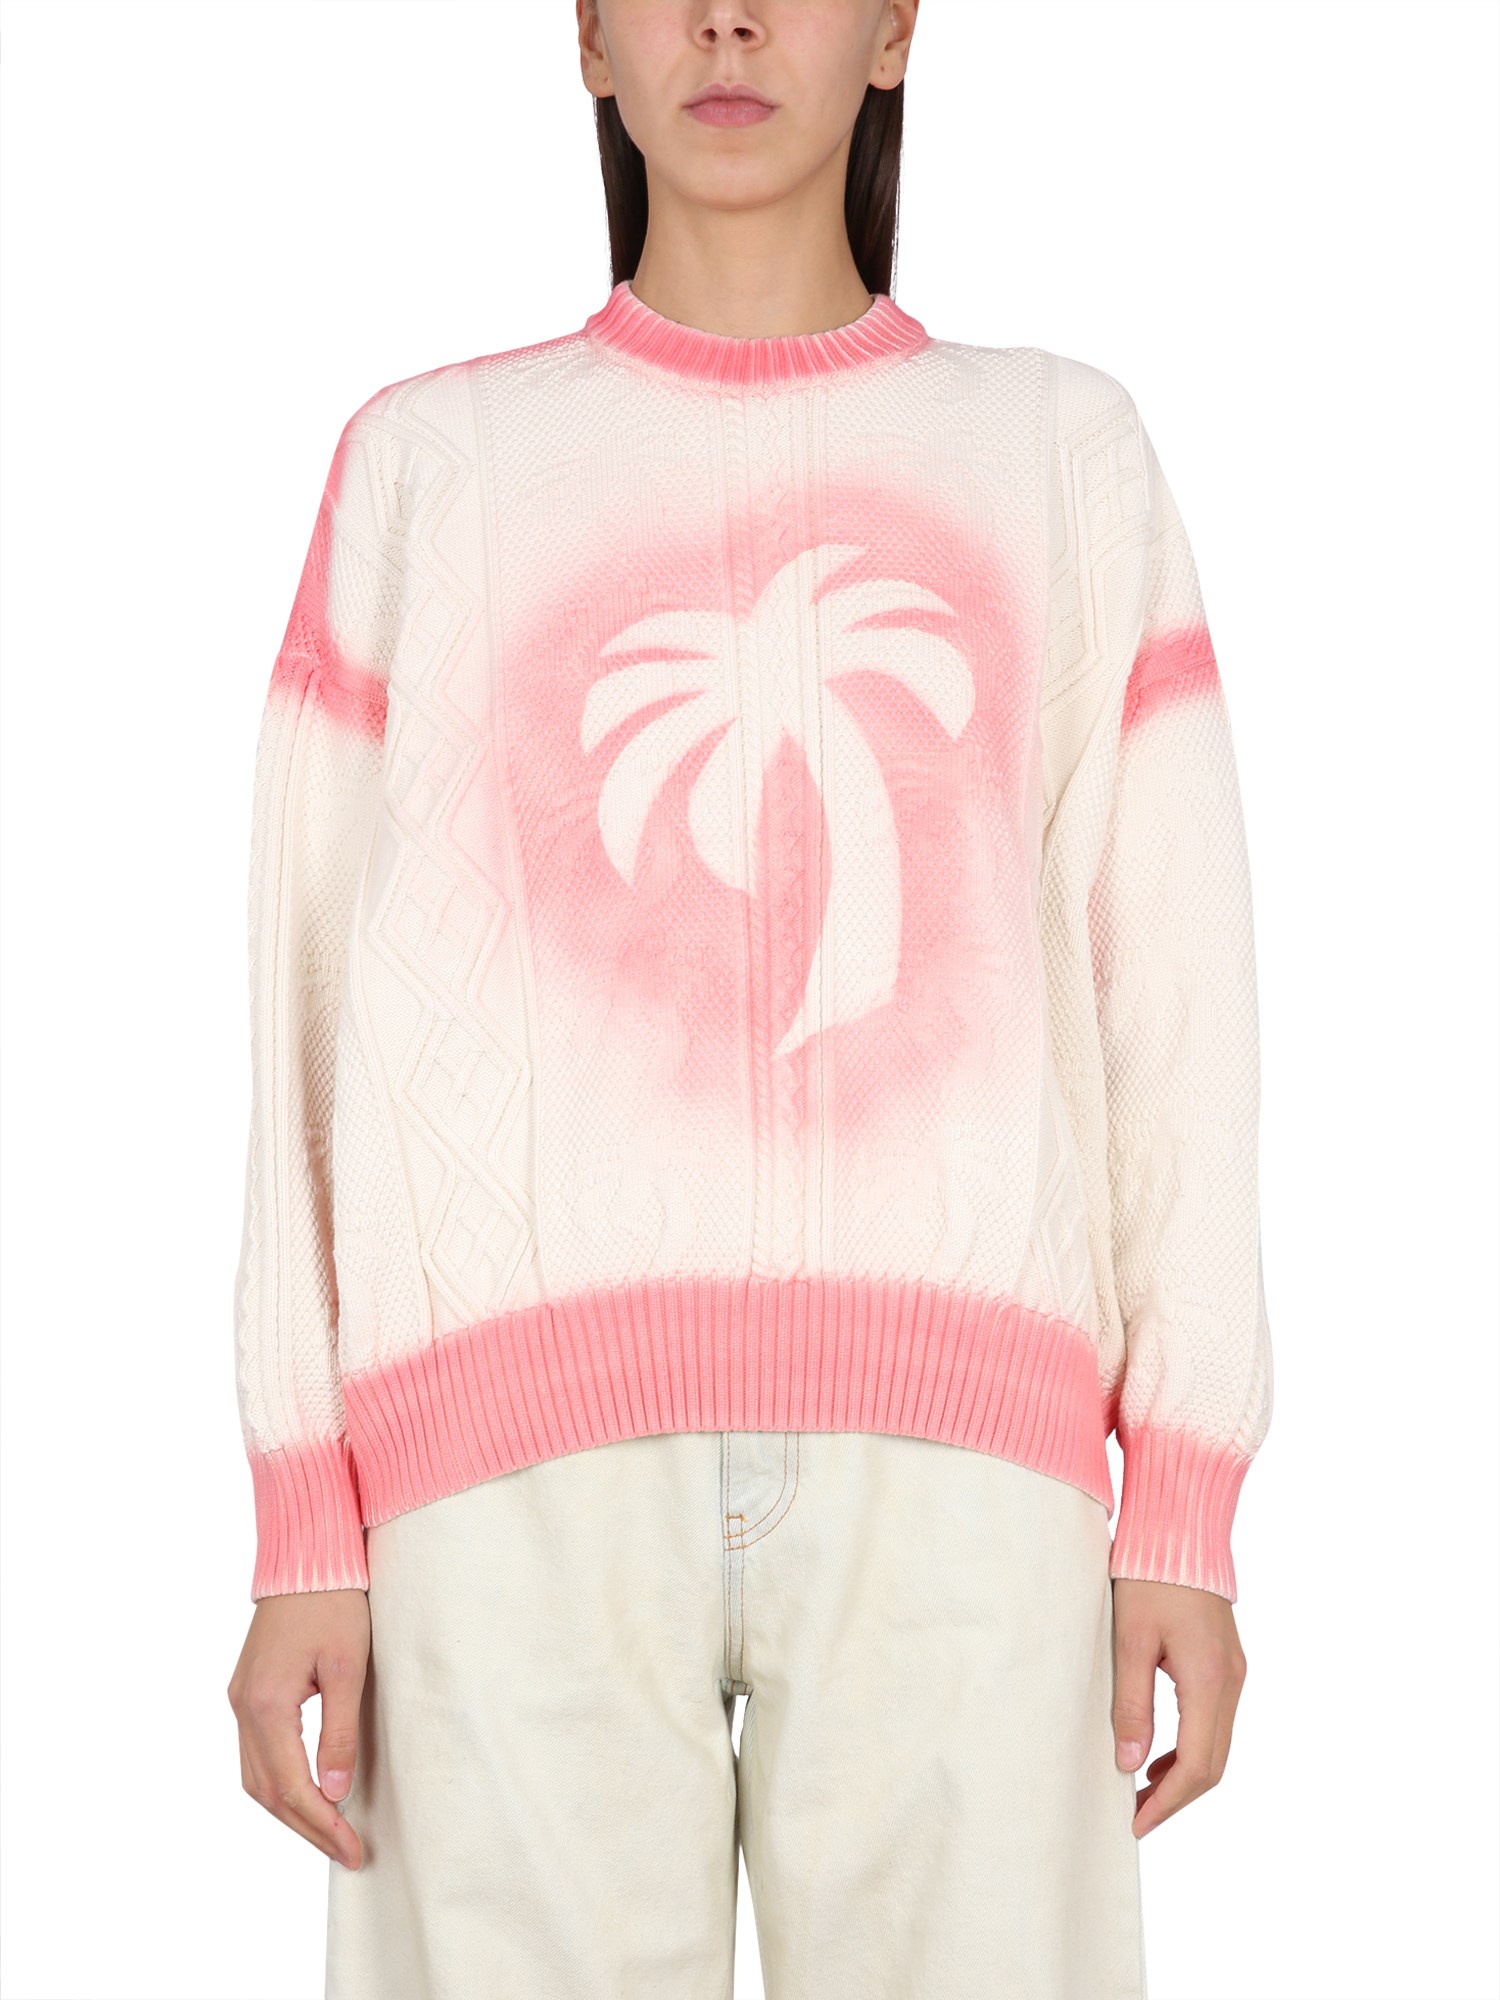 palm angels patent leather effect palm sweater